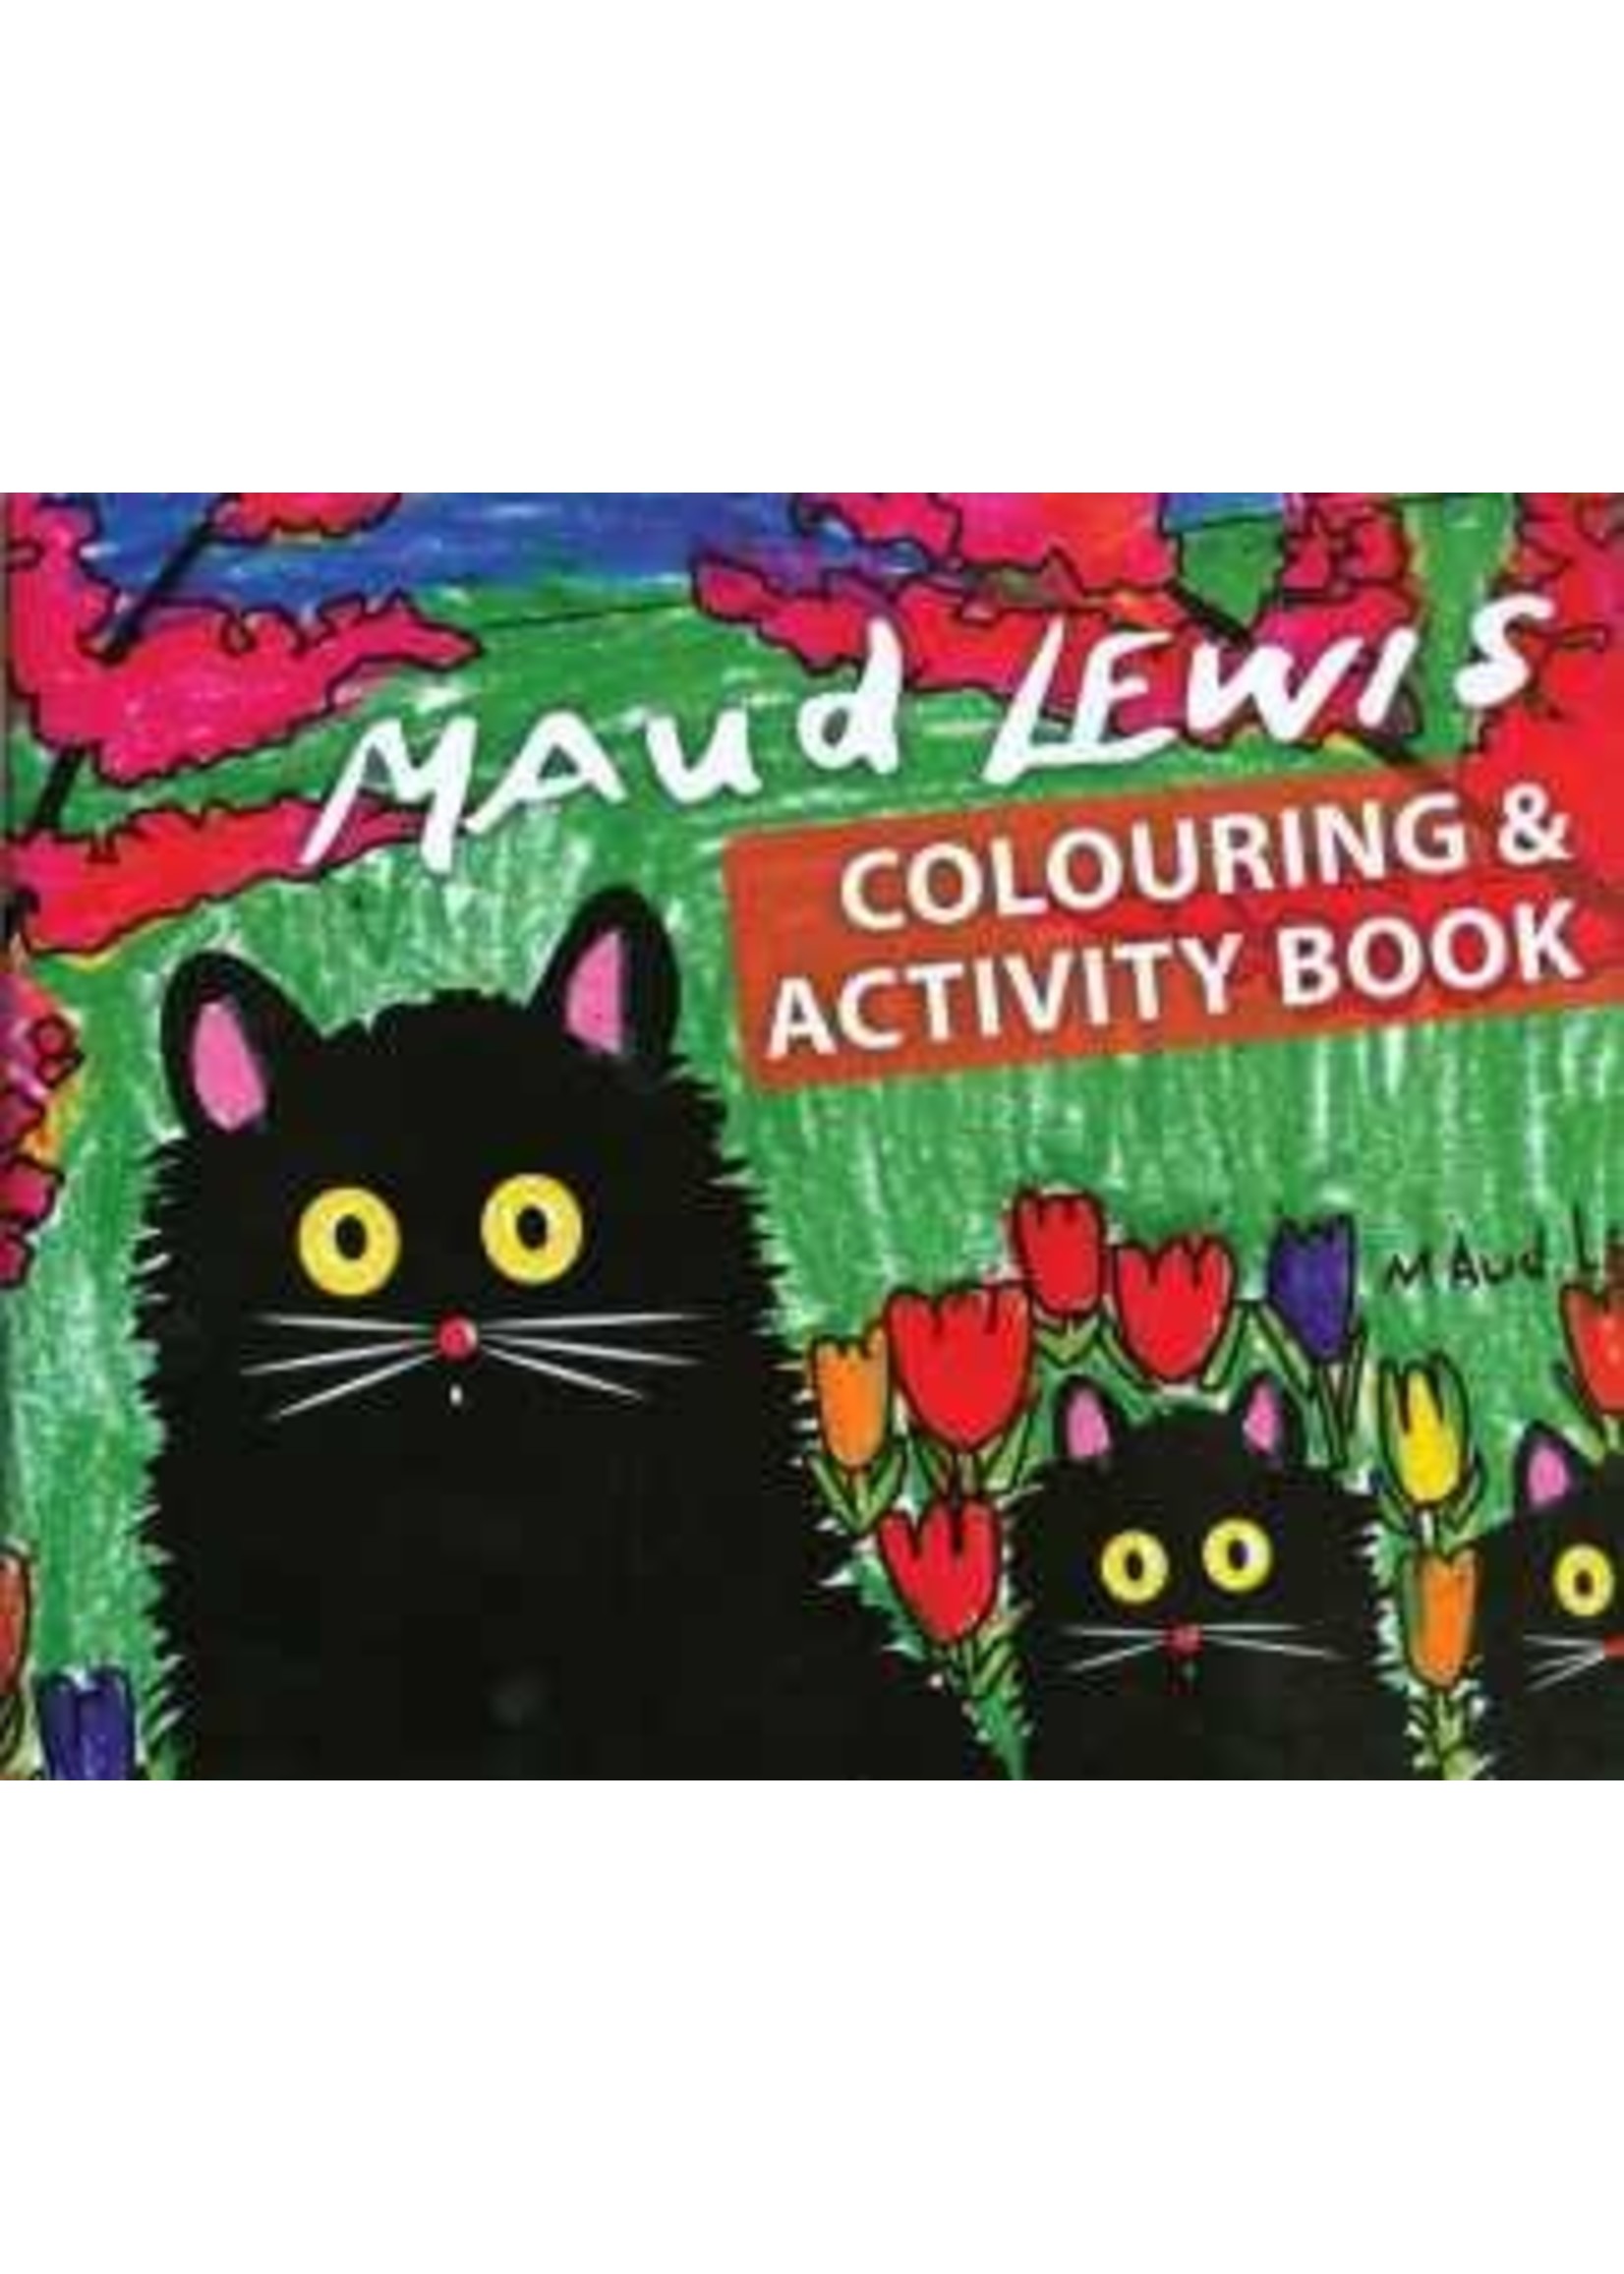 Maud Lewis Activity and Colouring Book by Art Gallery of Nova Scotia